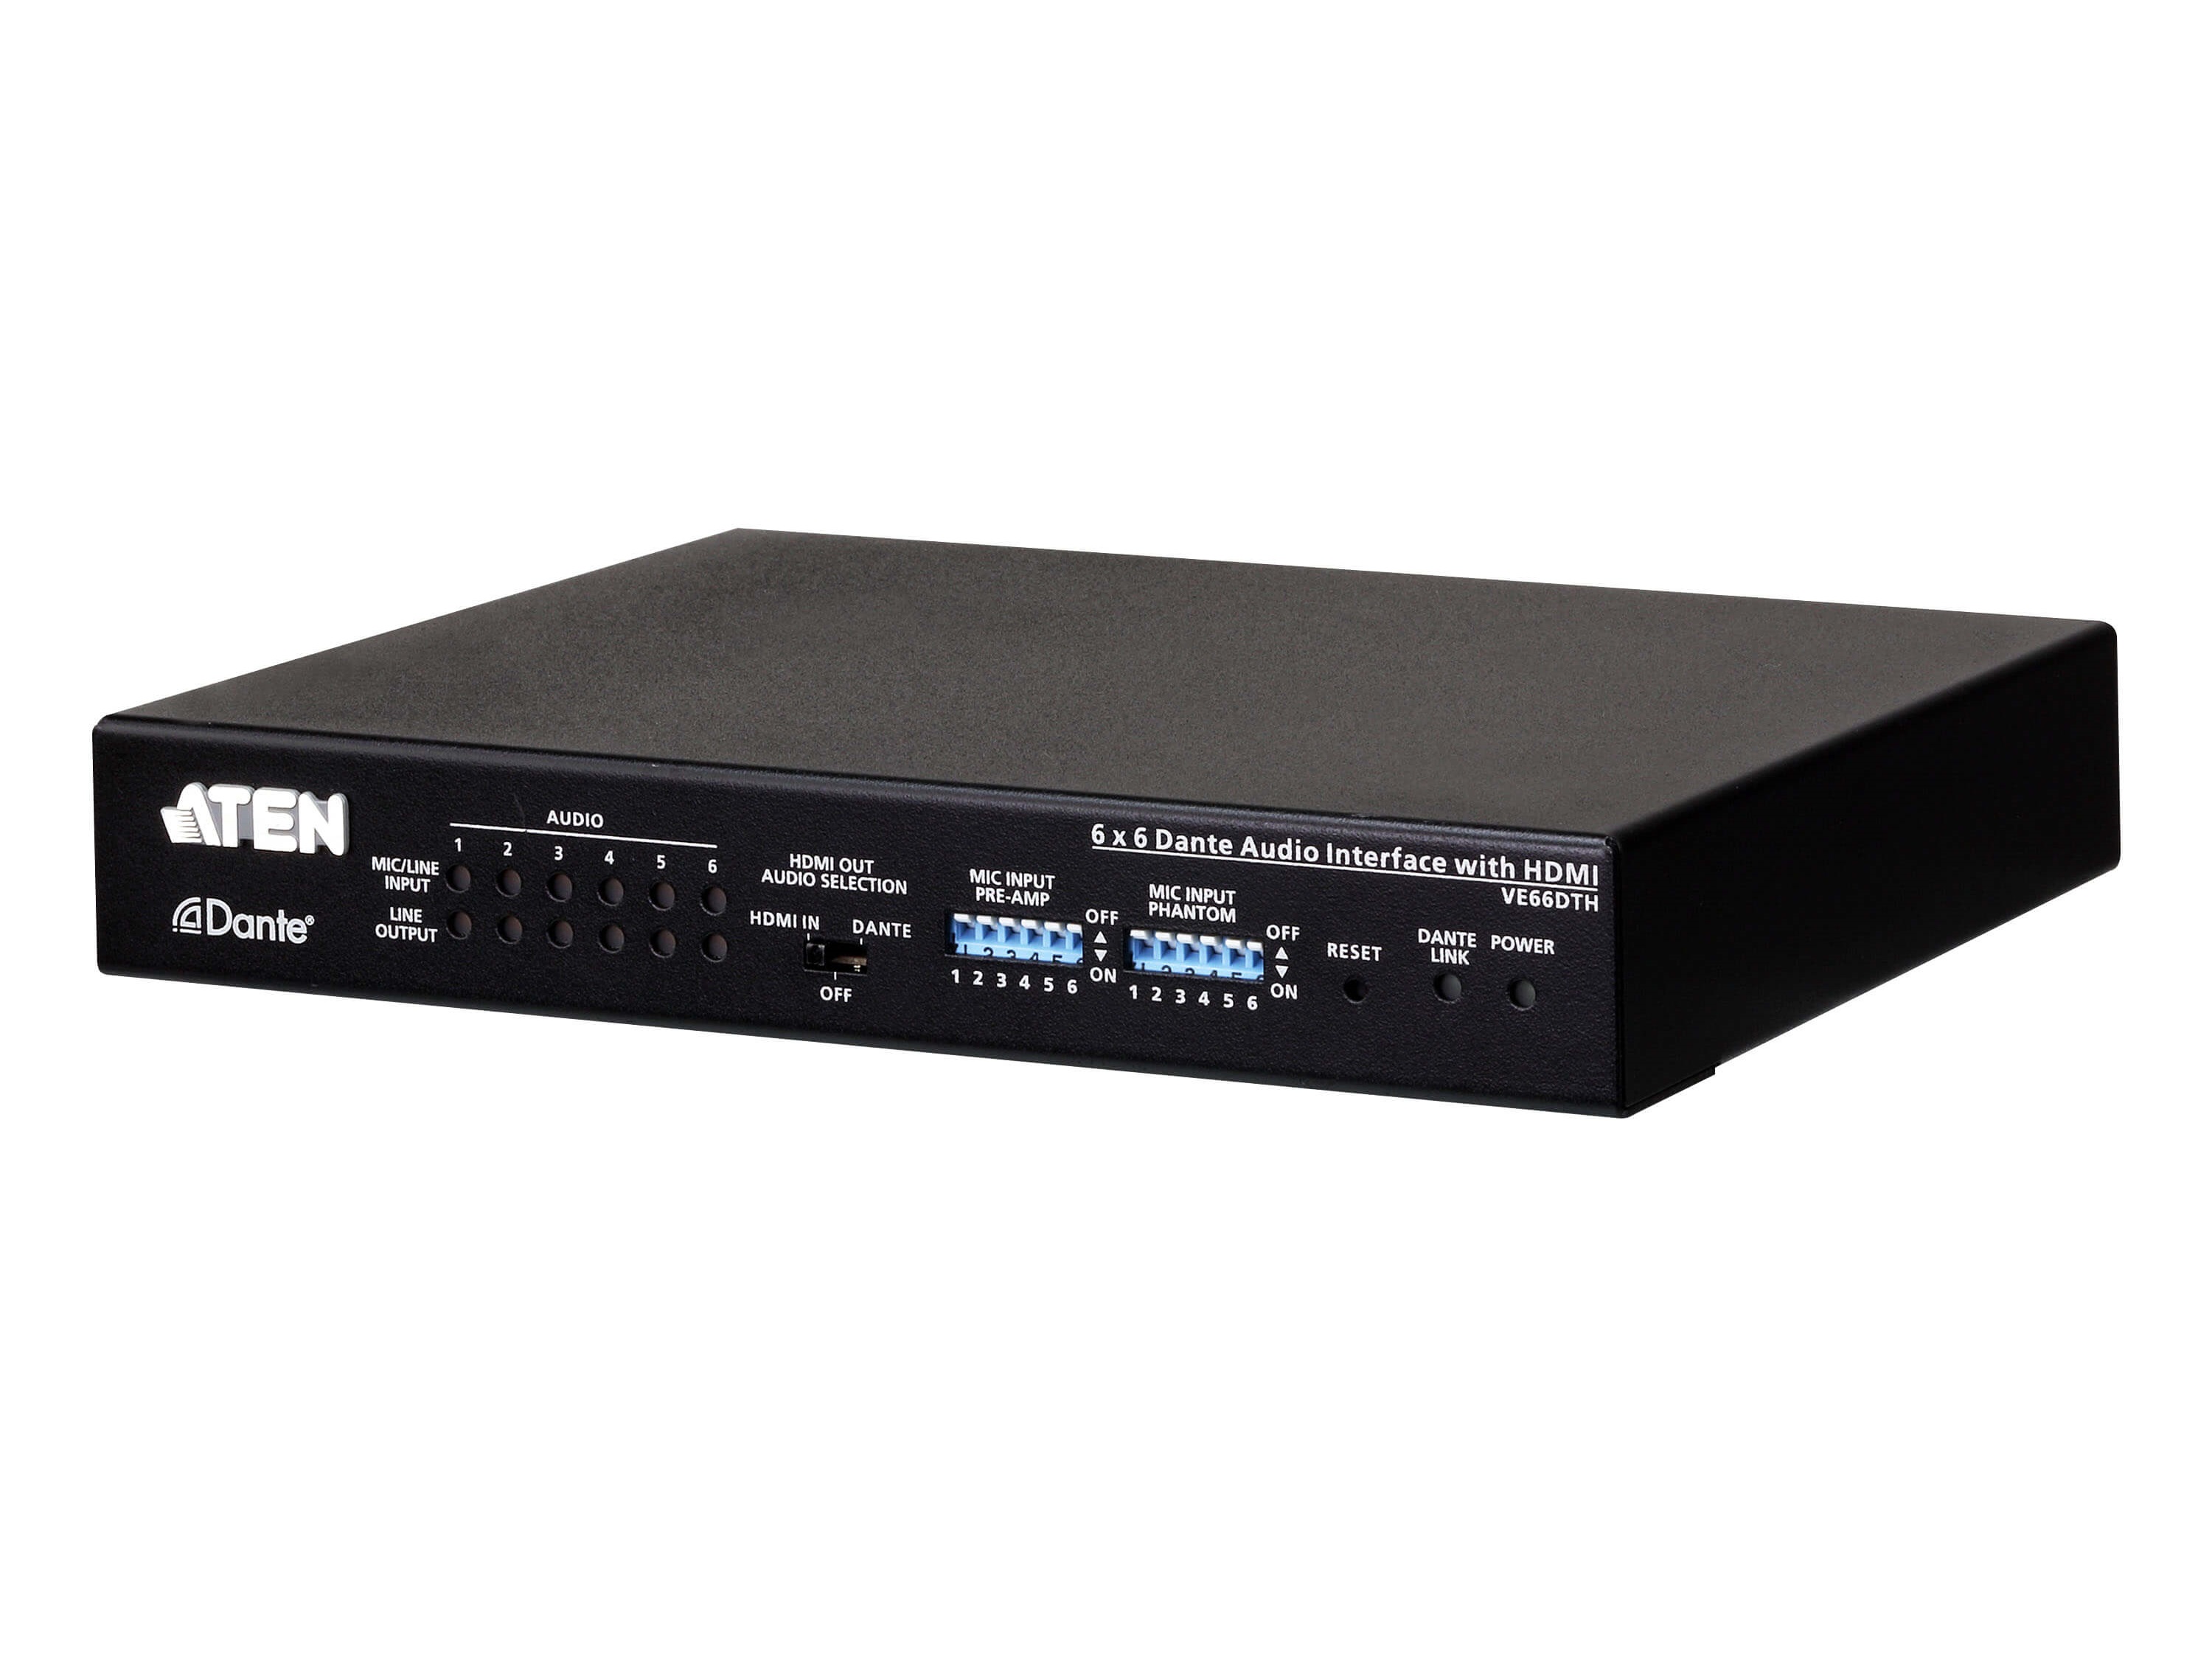 VE66DTH 6x6 Dante Audio Interface with HDMI by Aten